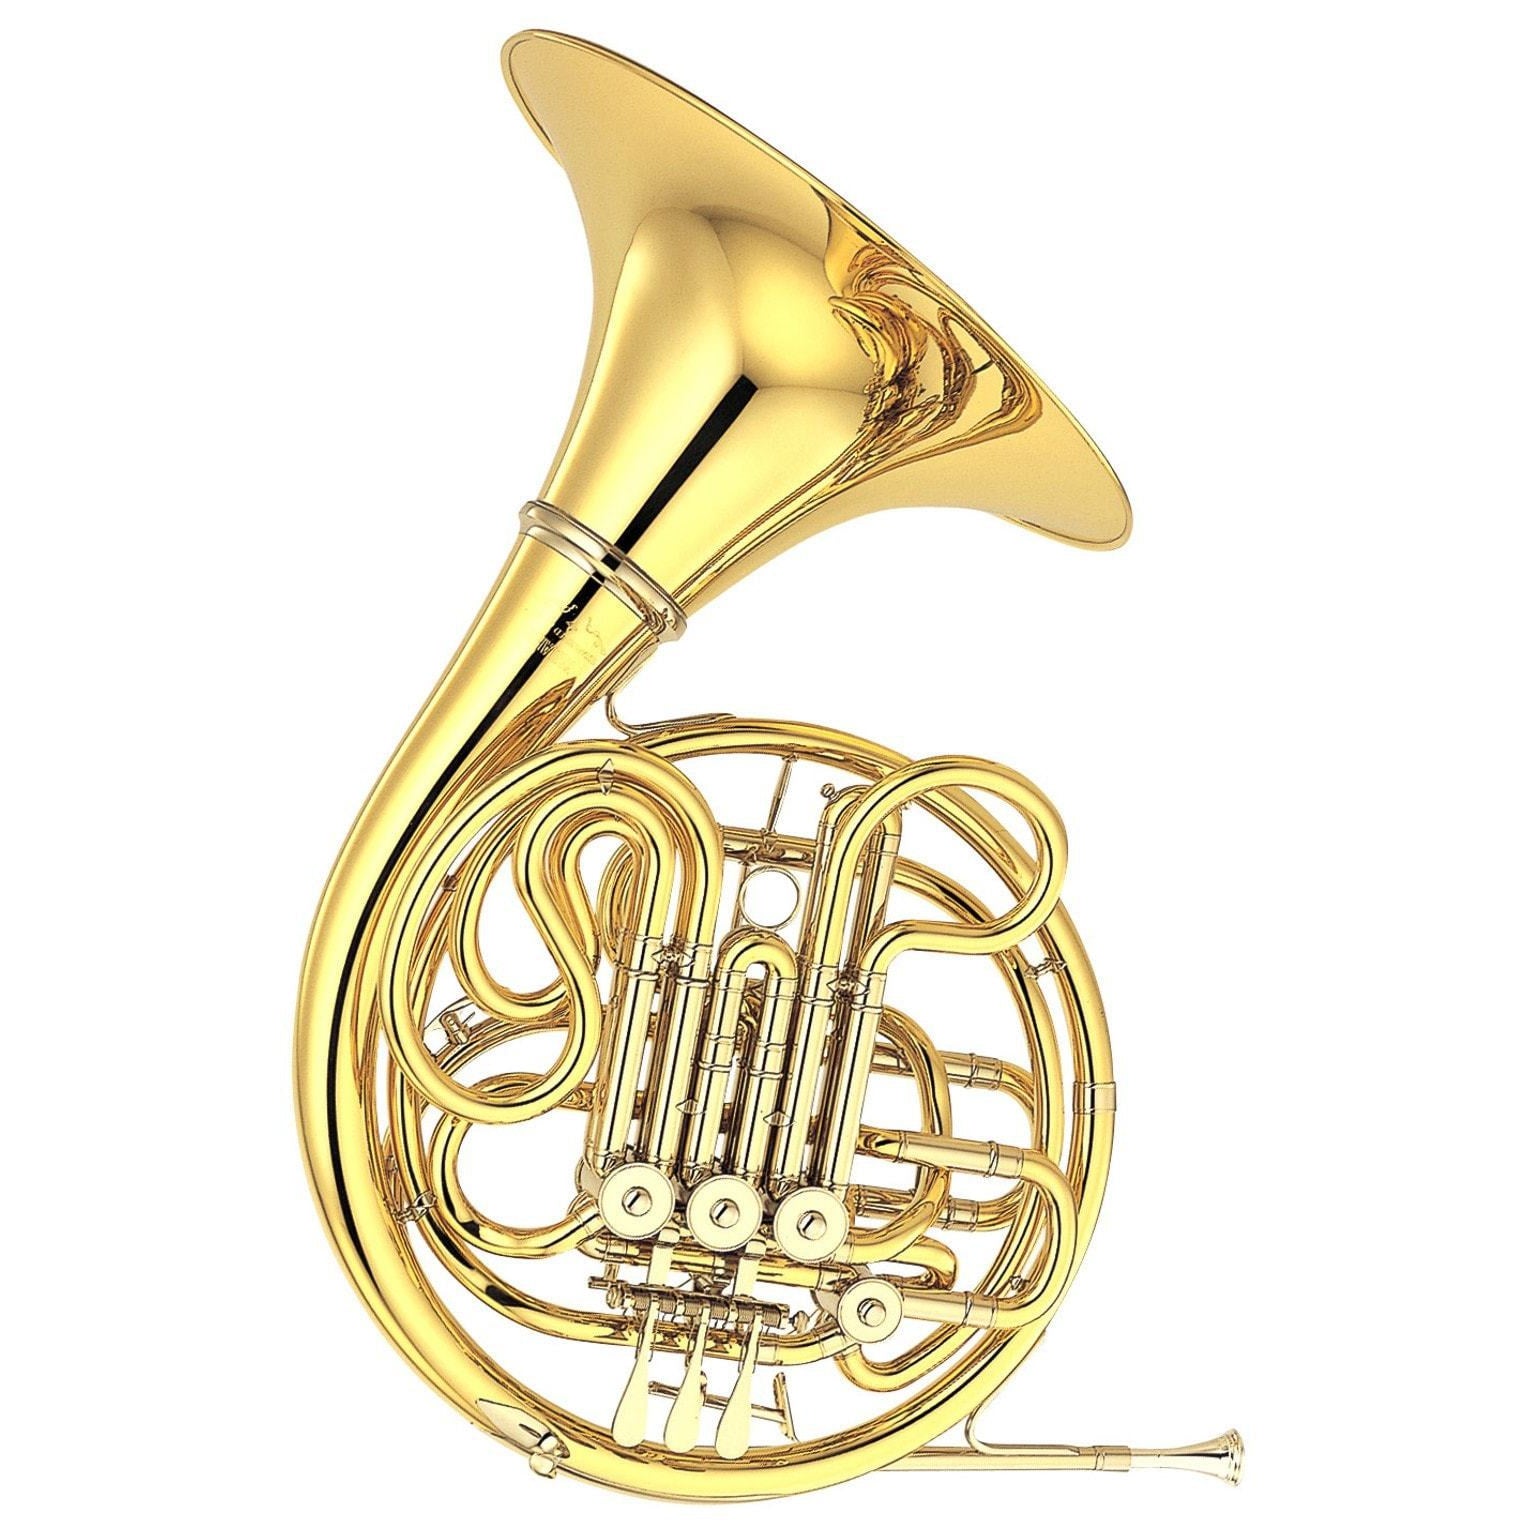 Yamaha YHR-668II Professional Series F / Bb Double French Horn YHR-668DII - Detachable Bell and HRC-70 Case